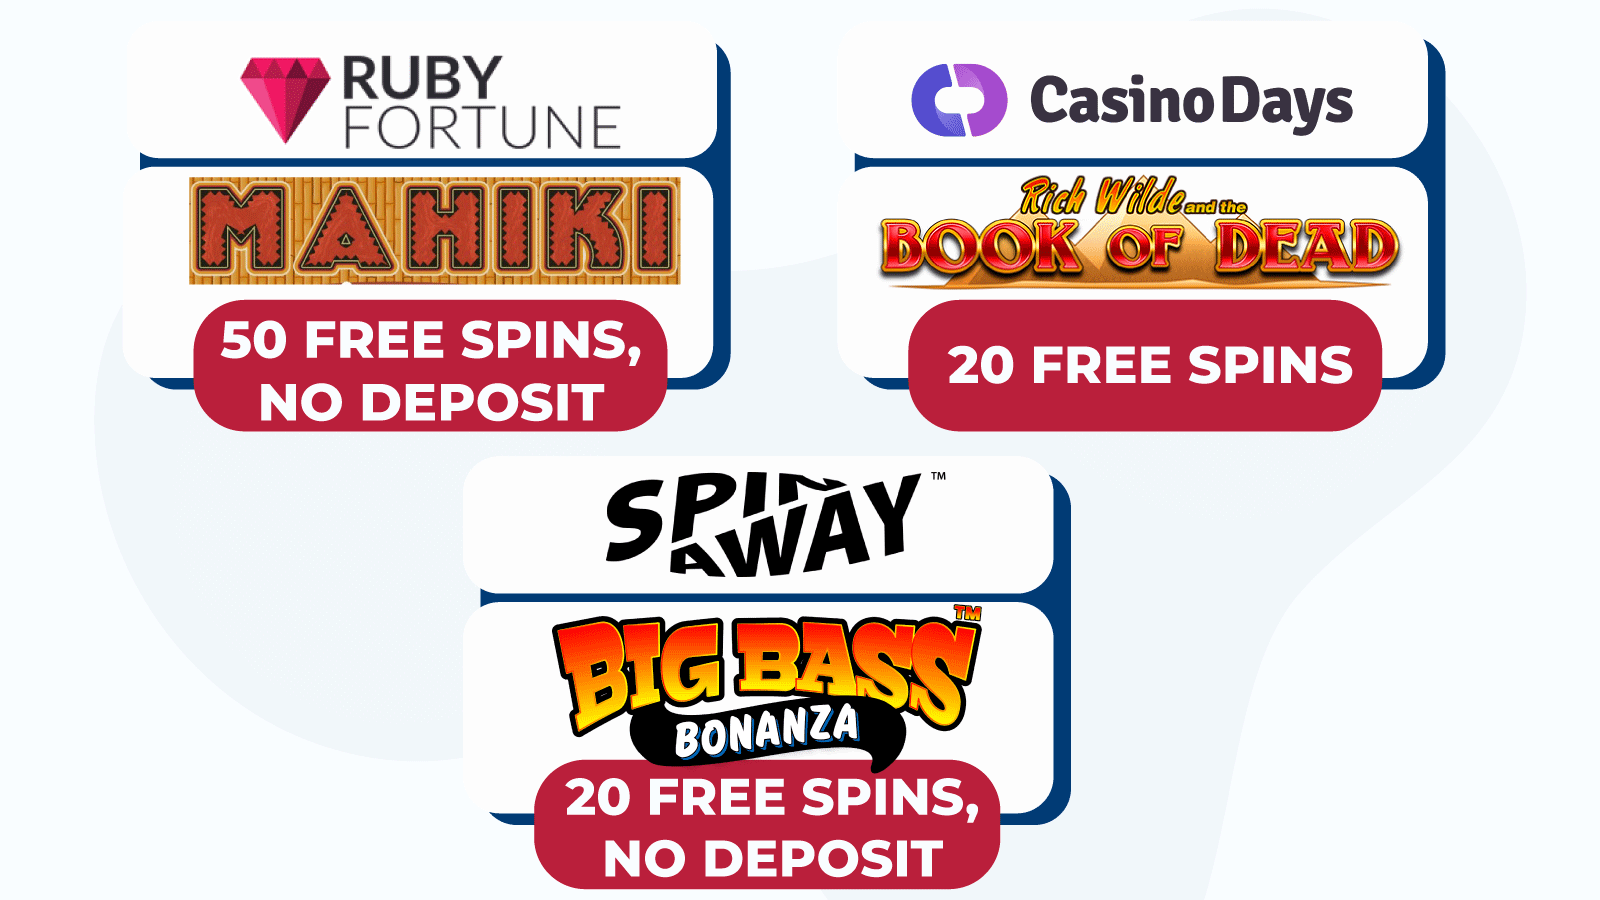 Free spins from instant withdrawal slots sites